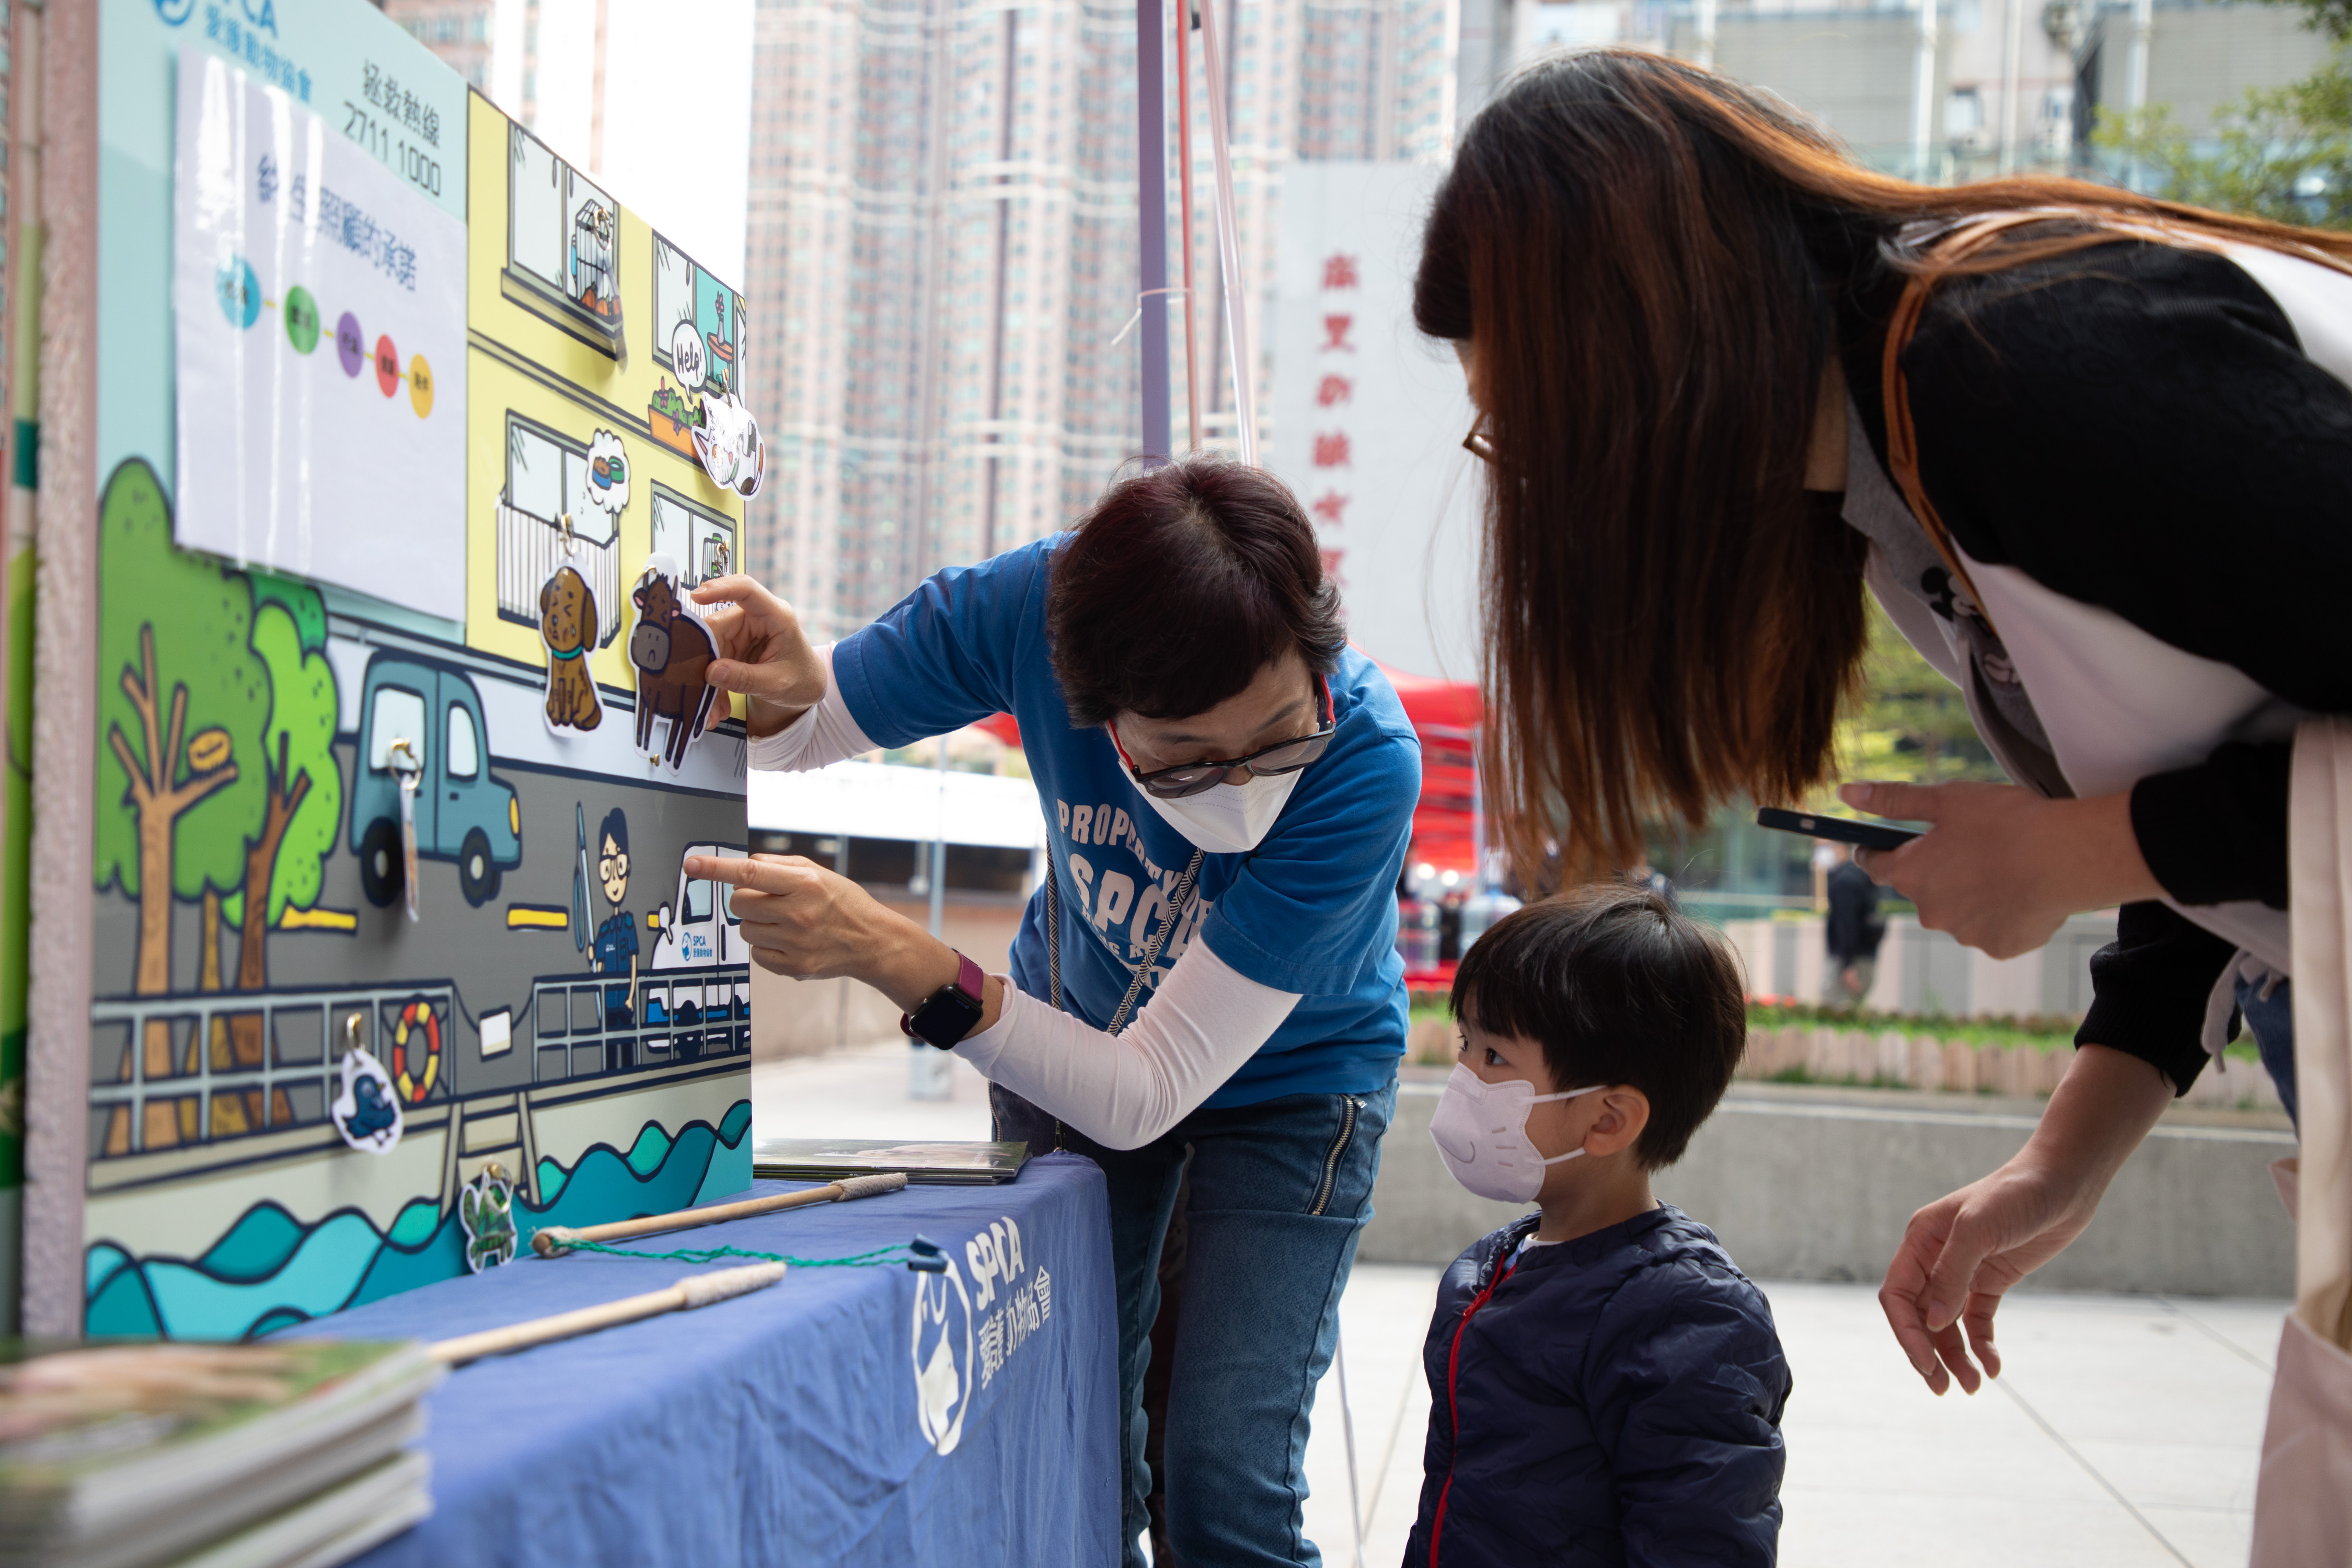 Visitors obtained information on pet adoption and animal care from different animal welfare organisations.